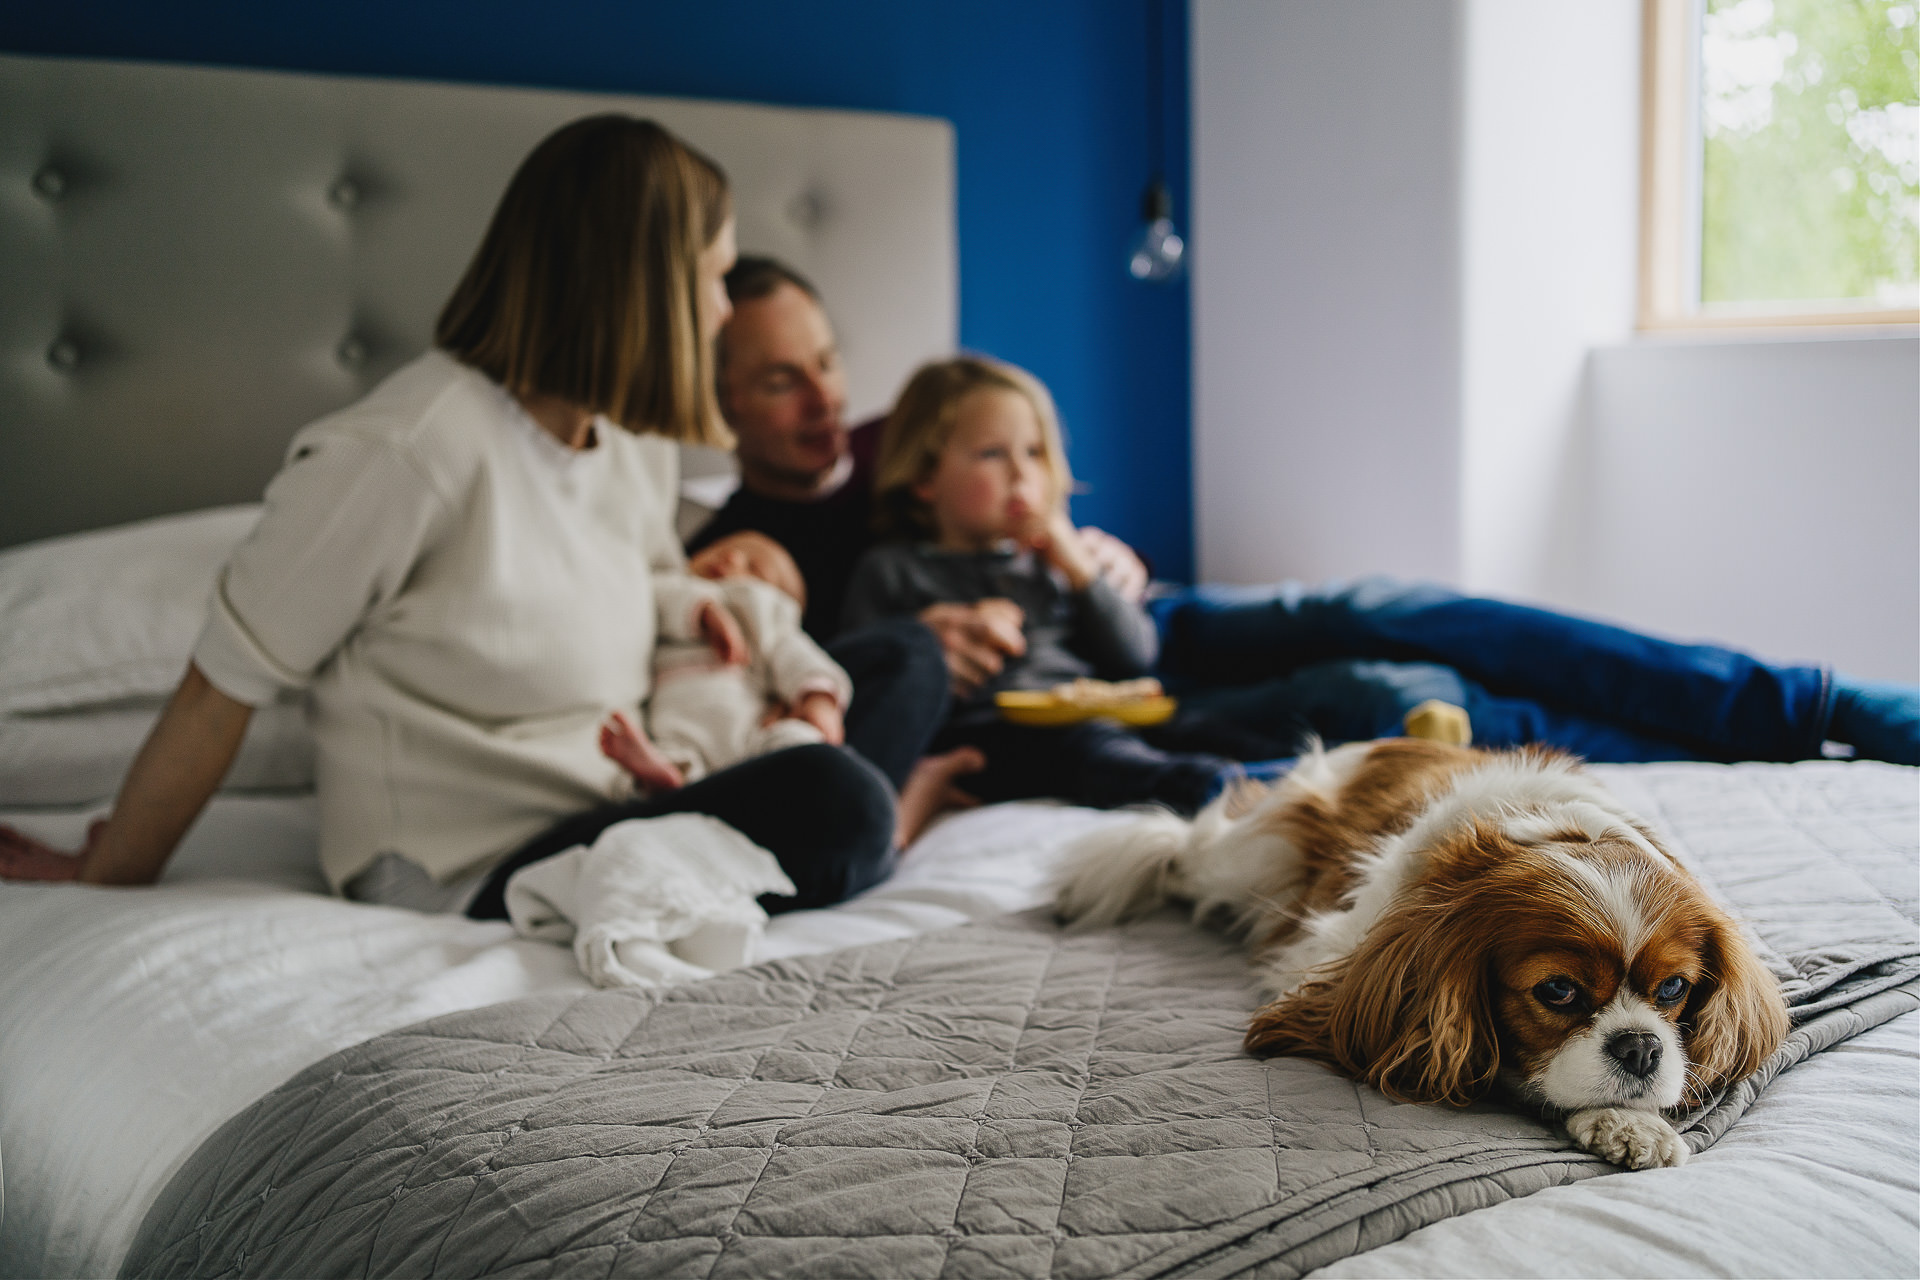 A family sitting together on a bed with a spaniel in the foreground